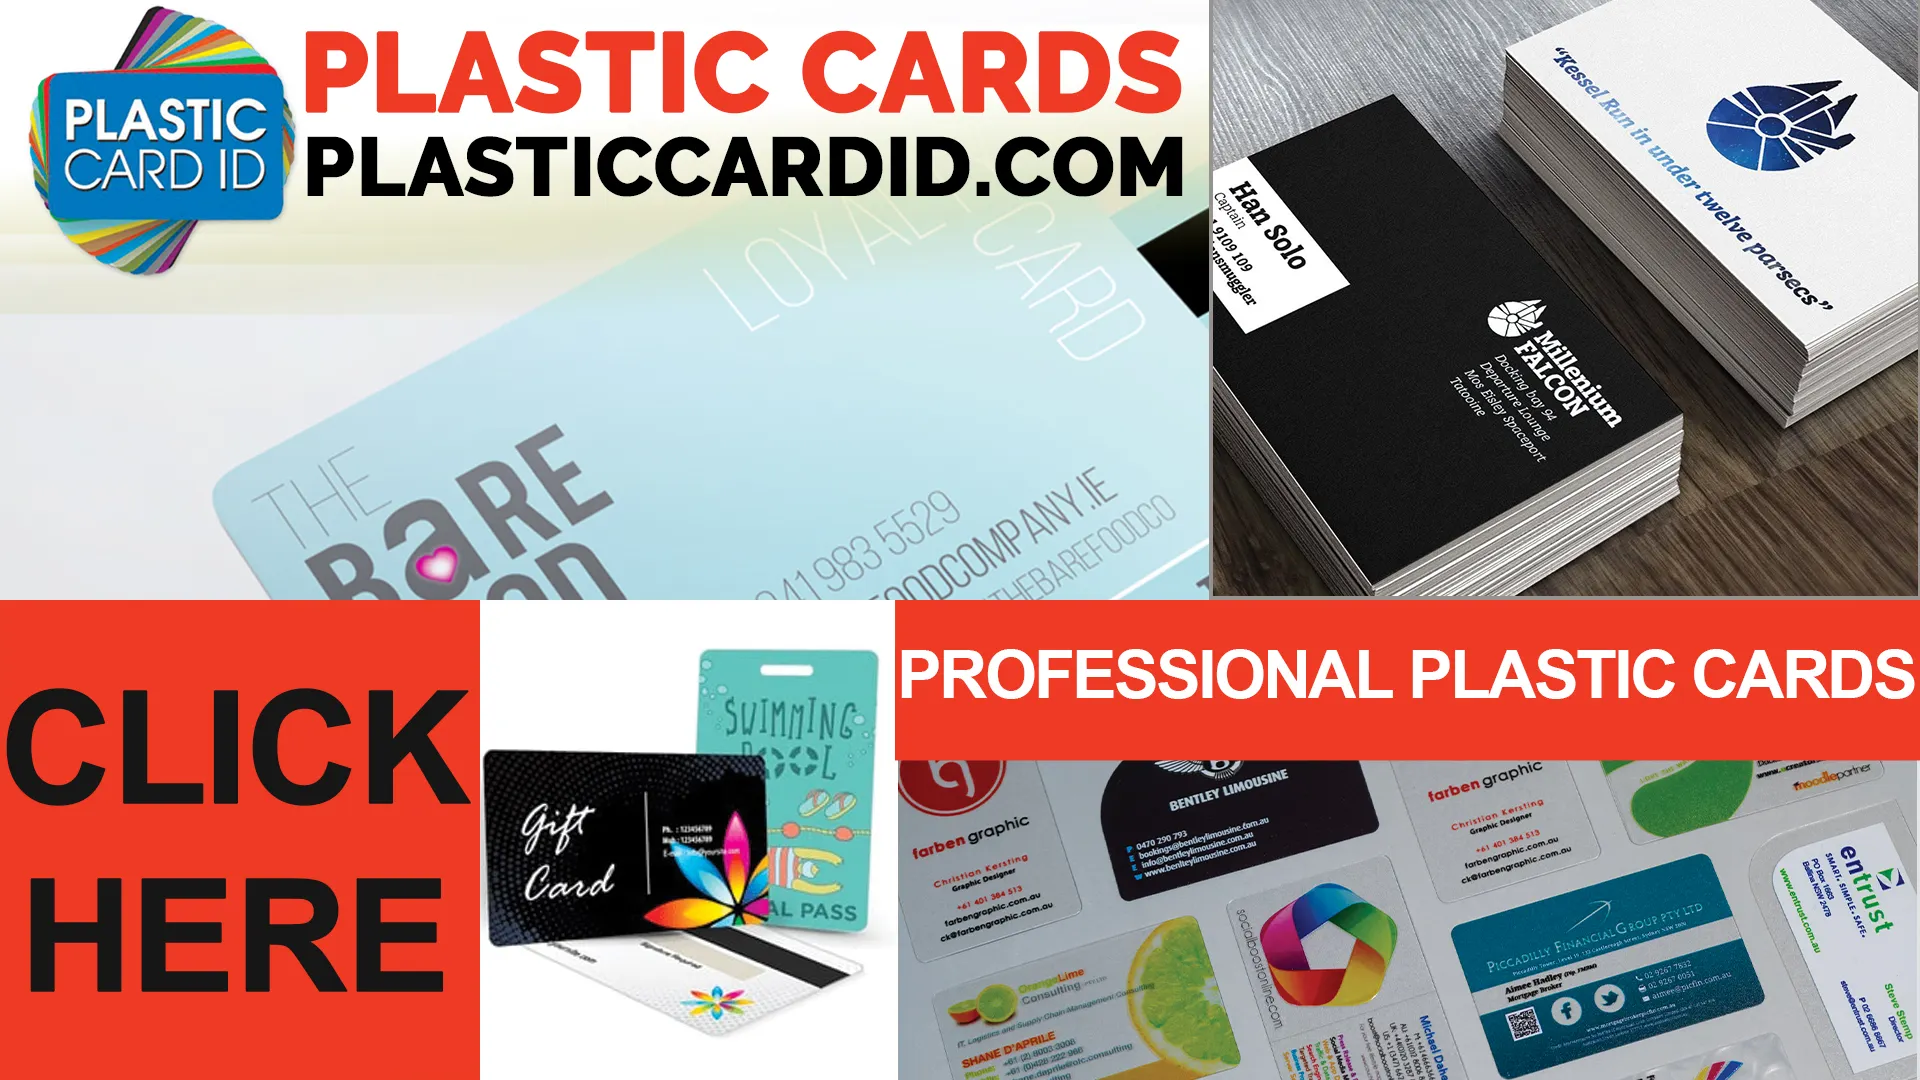 A Look Inside Biodegradable Plastic Cards